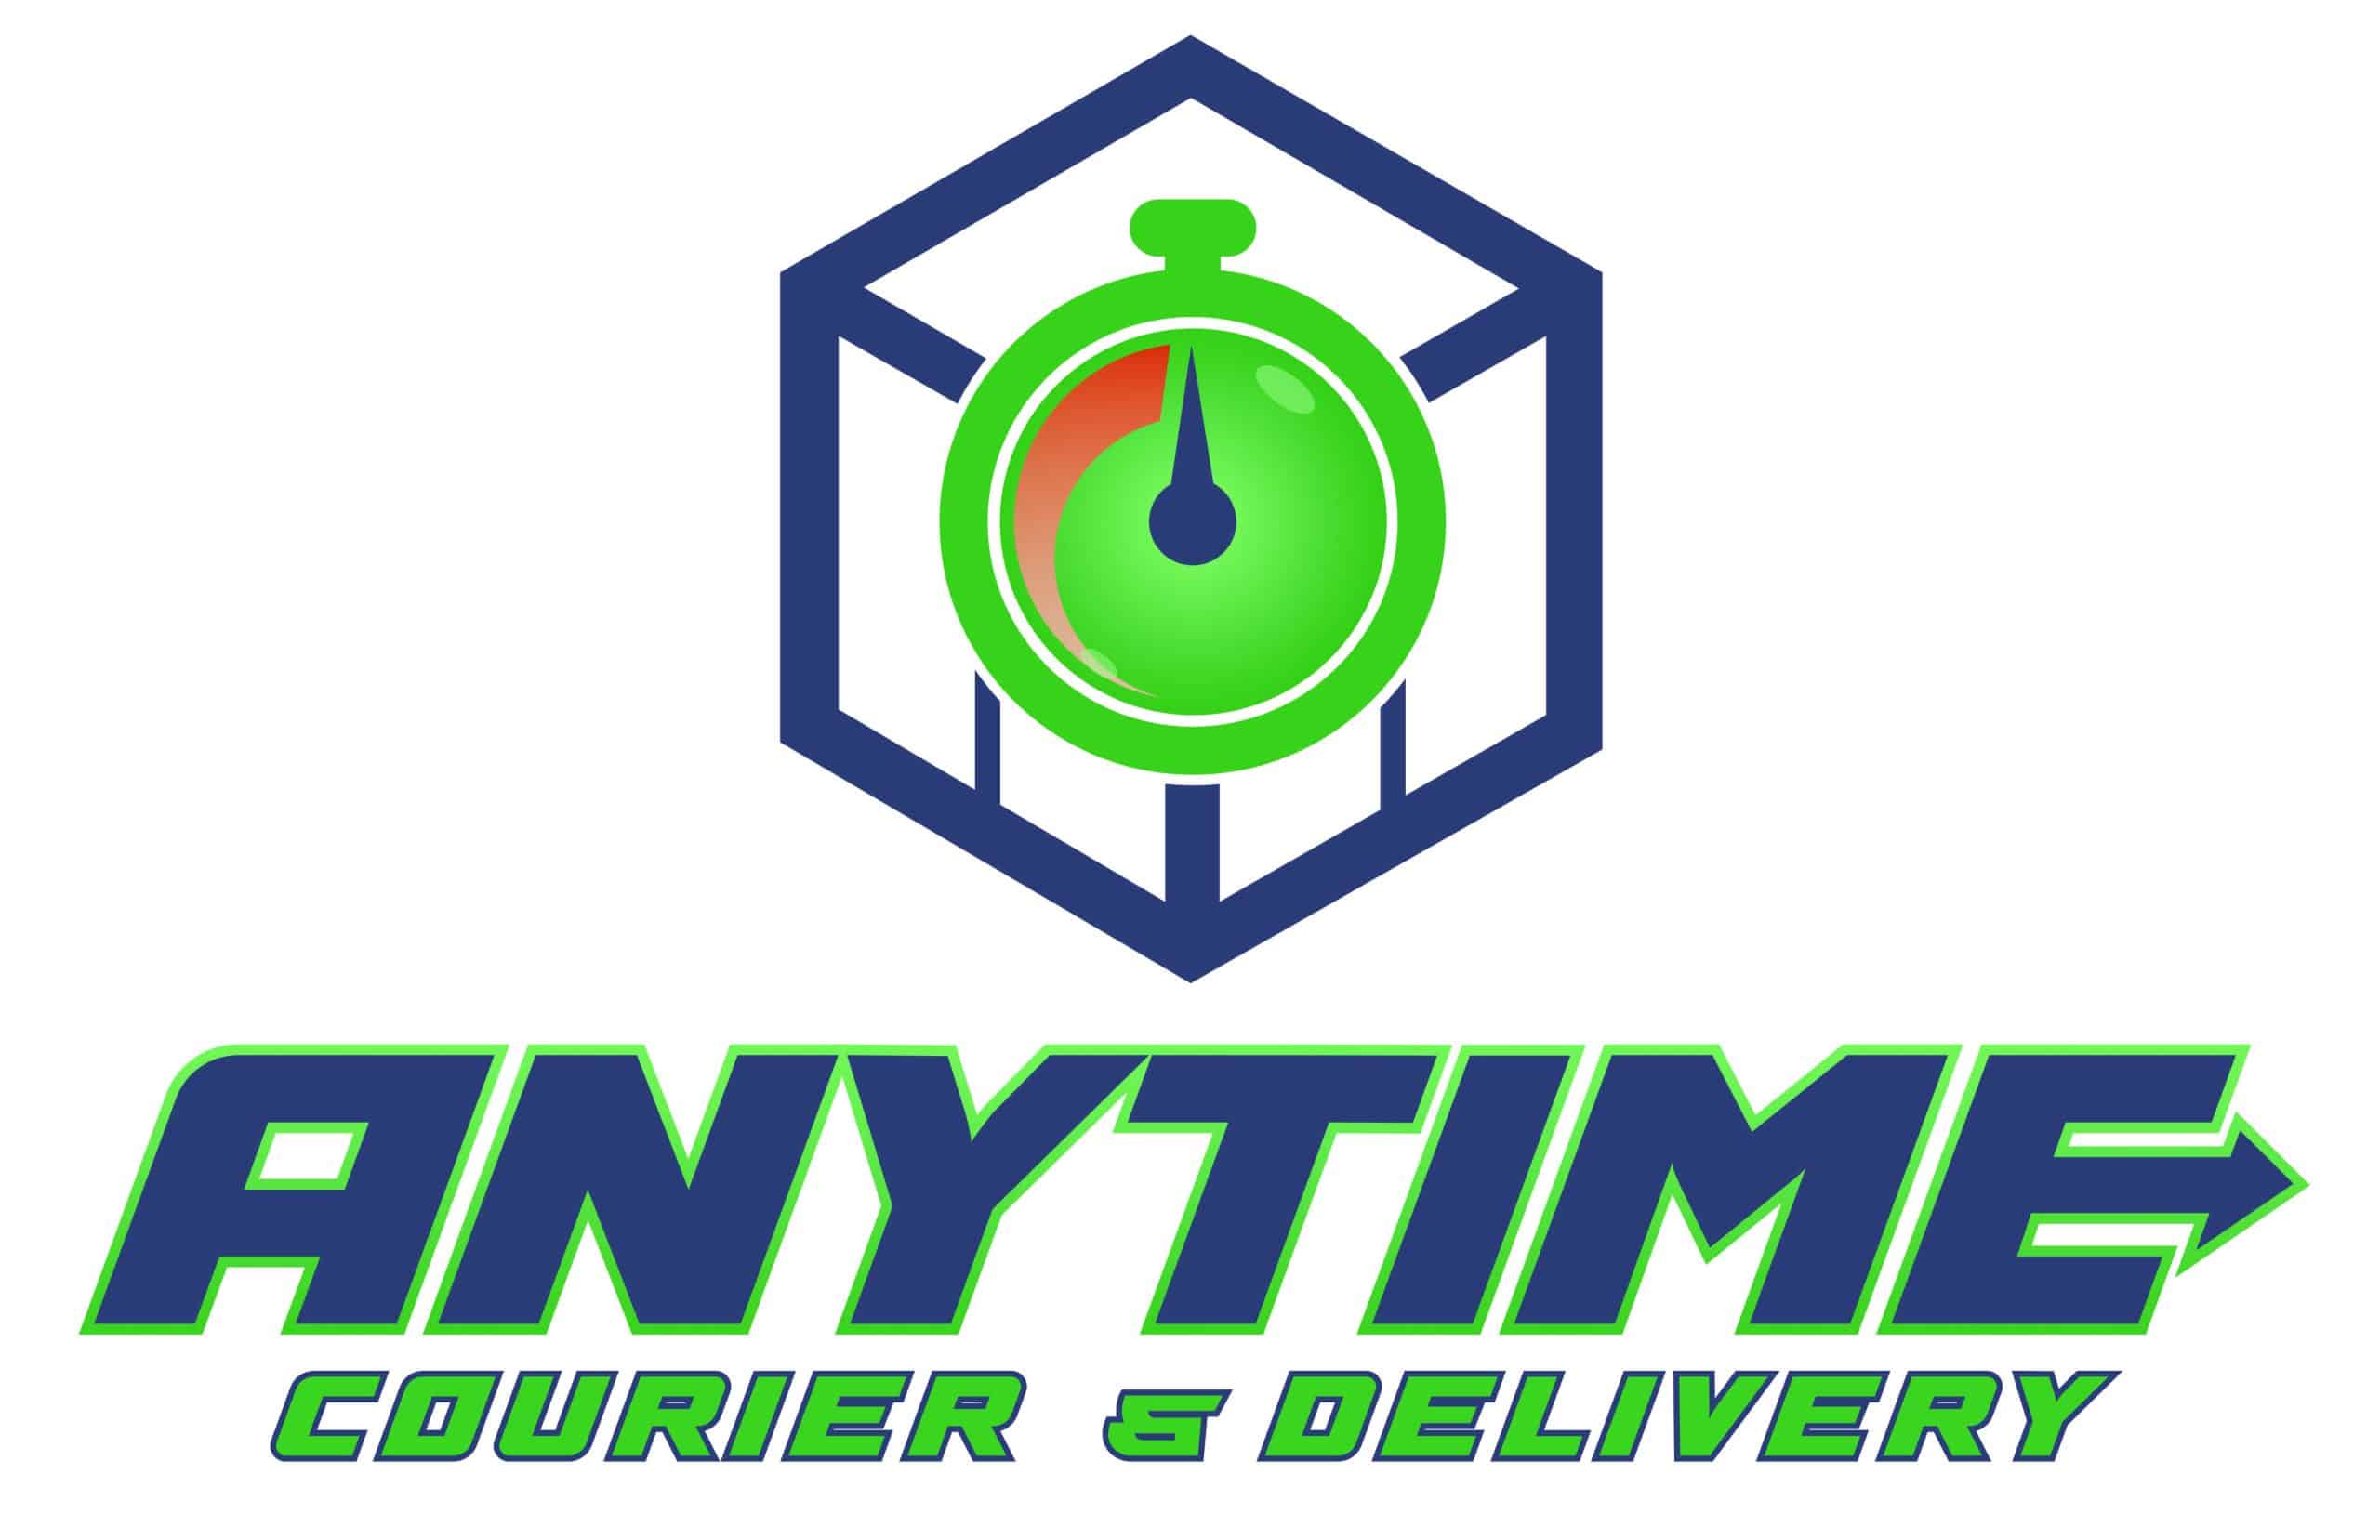 Anytime Courier & Delivery